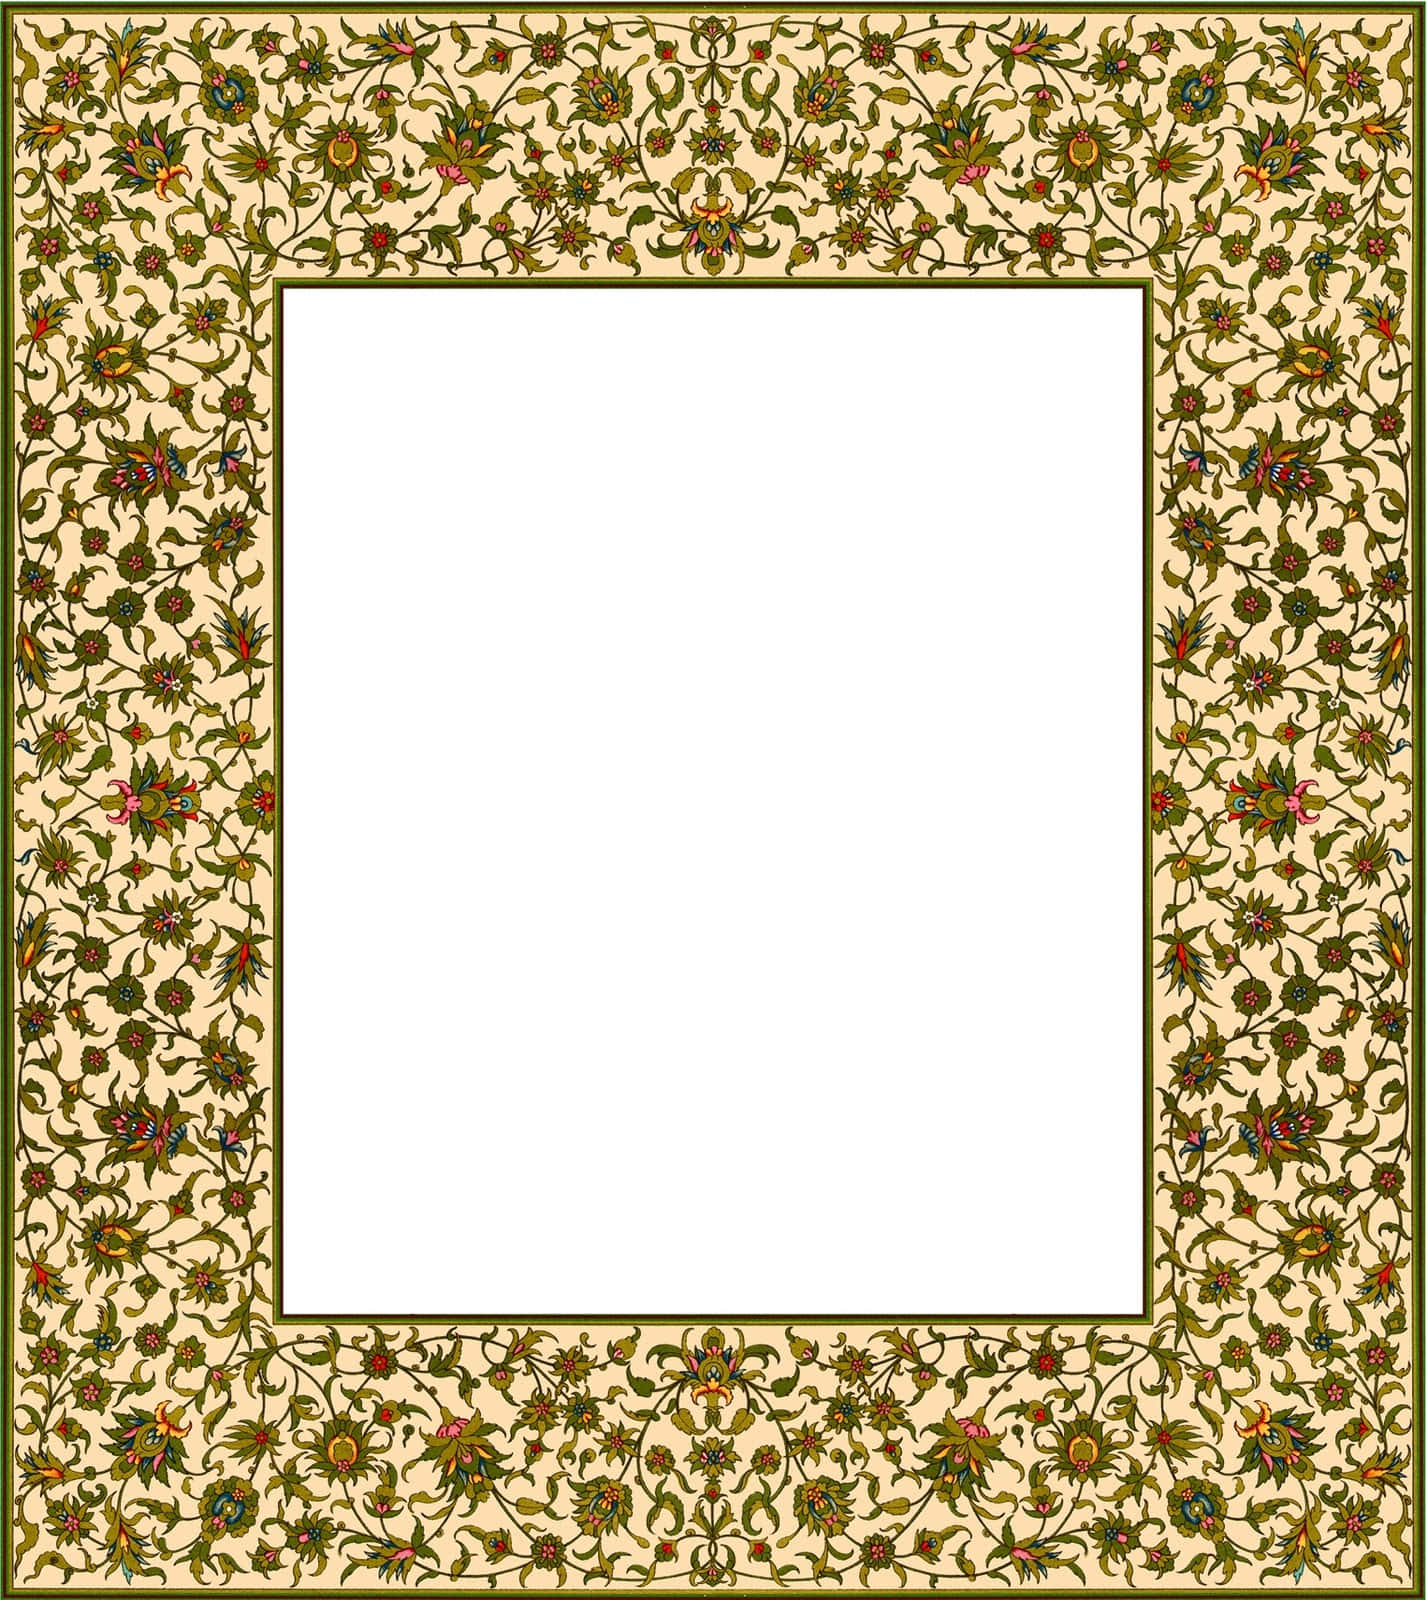 an ornate frame with floral designs